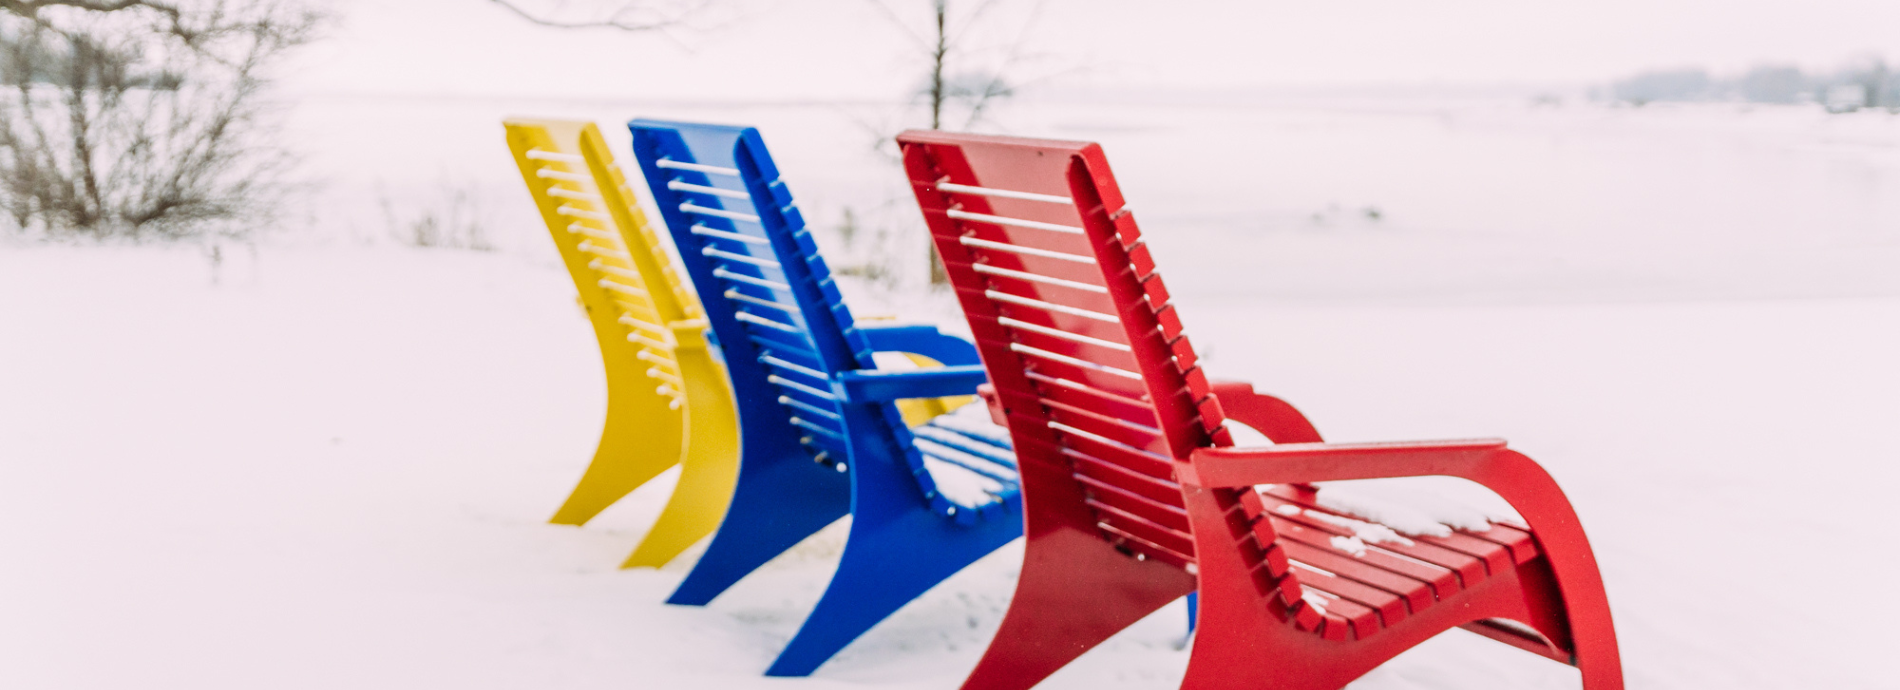 chairs at Washago Centennial Park covered in snow